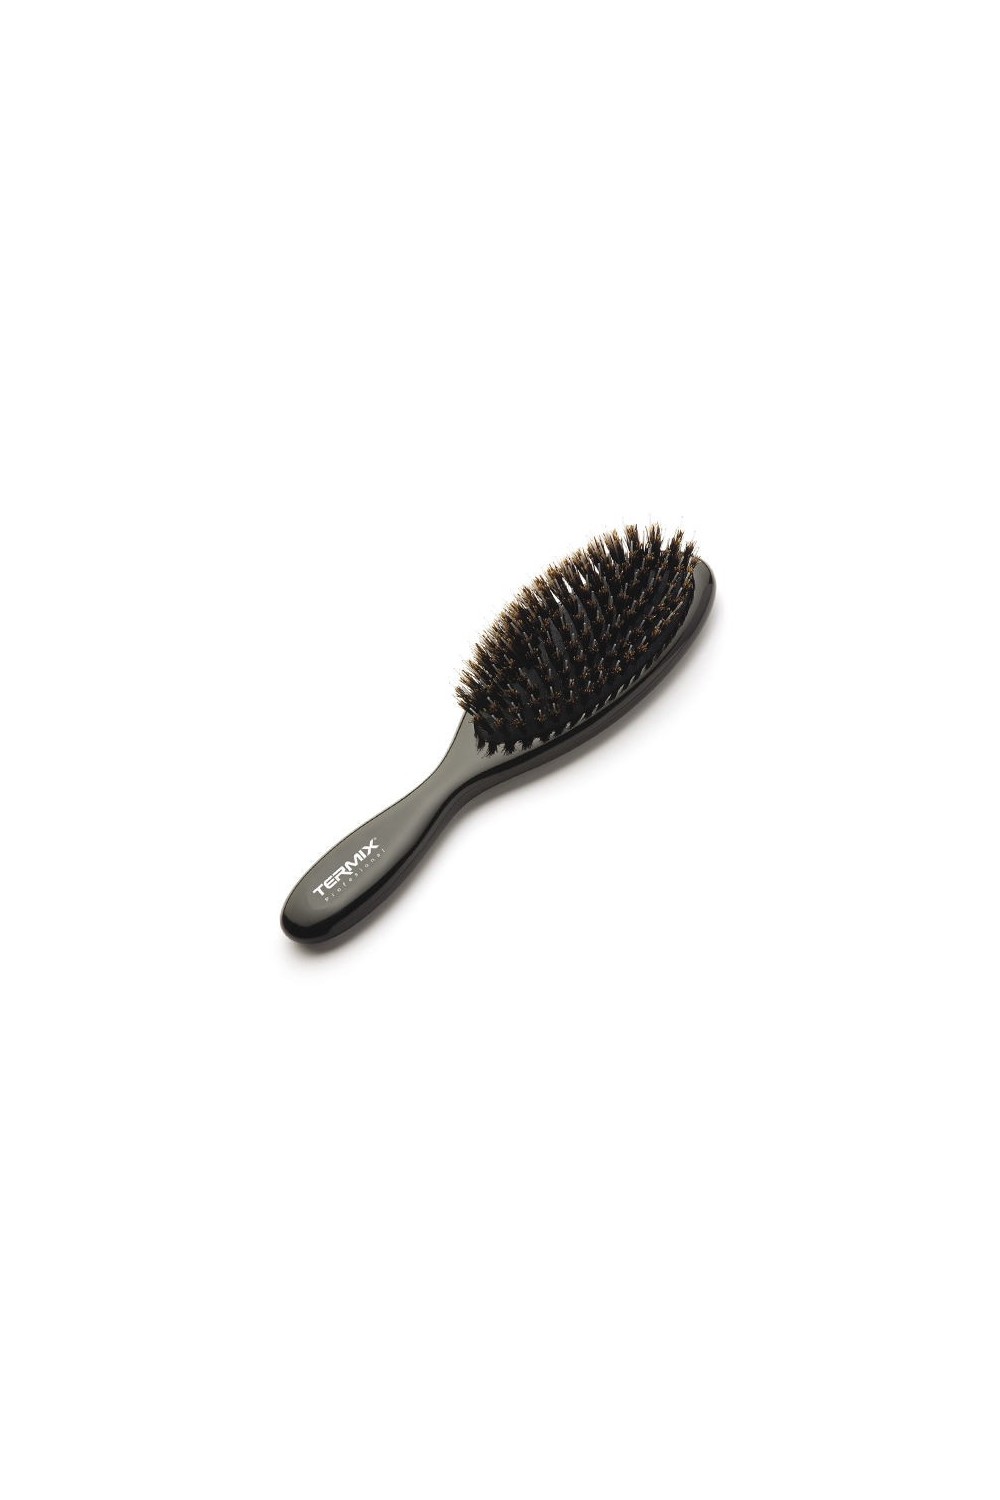 Termix Small Hairbrush For Extensions